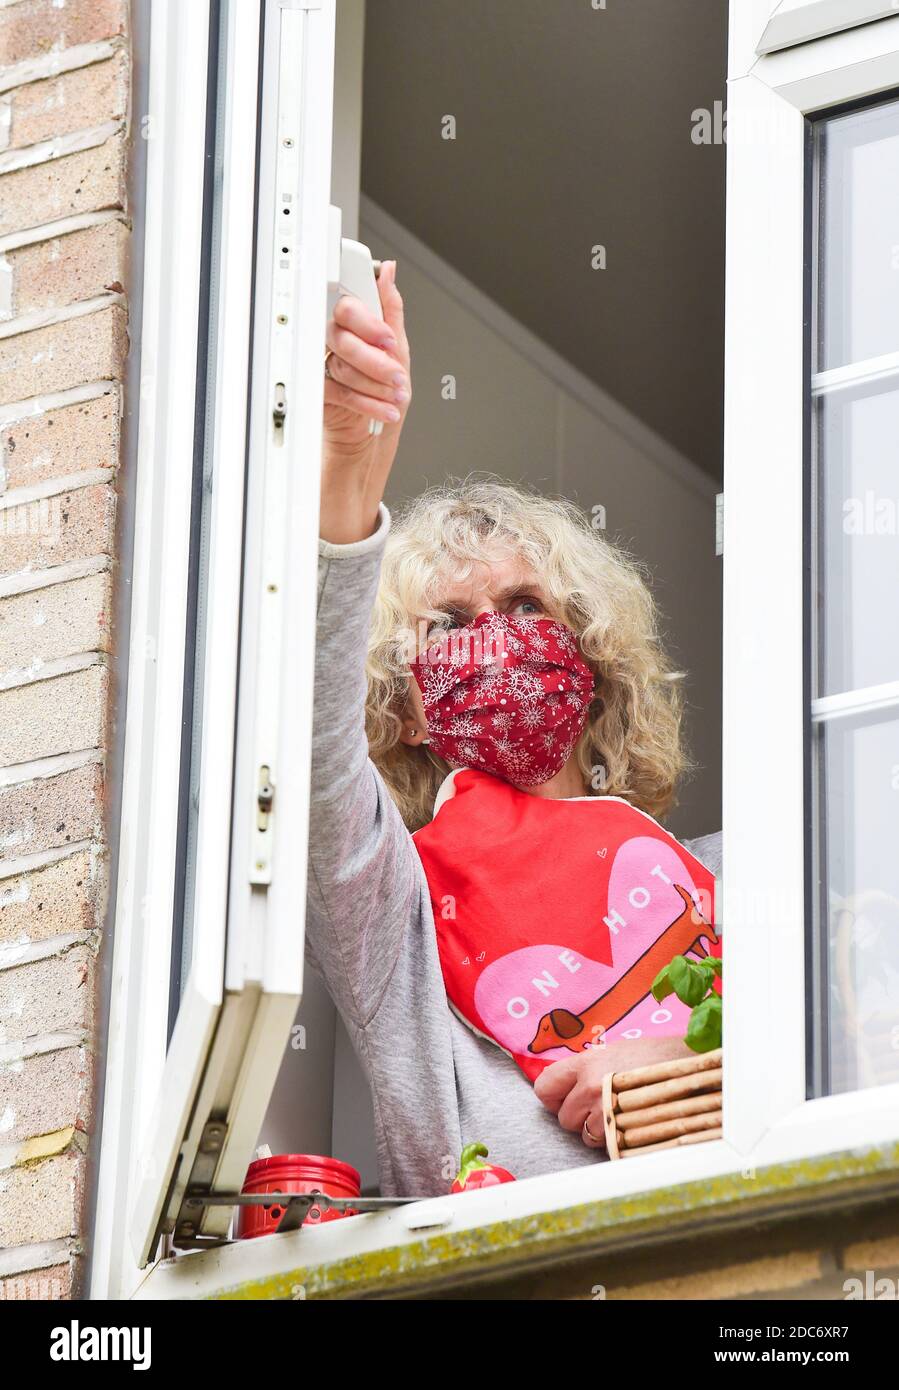 Woman holding a hot water bottle and wearing a face covering at home opening kitchen window to let in fresh air as advised to help combat coronavirus Stock Photo